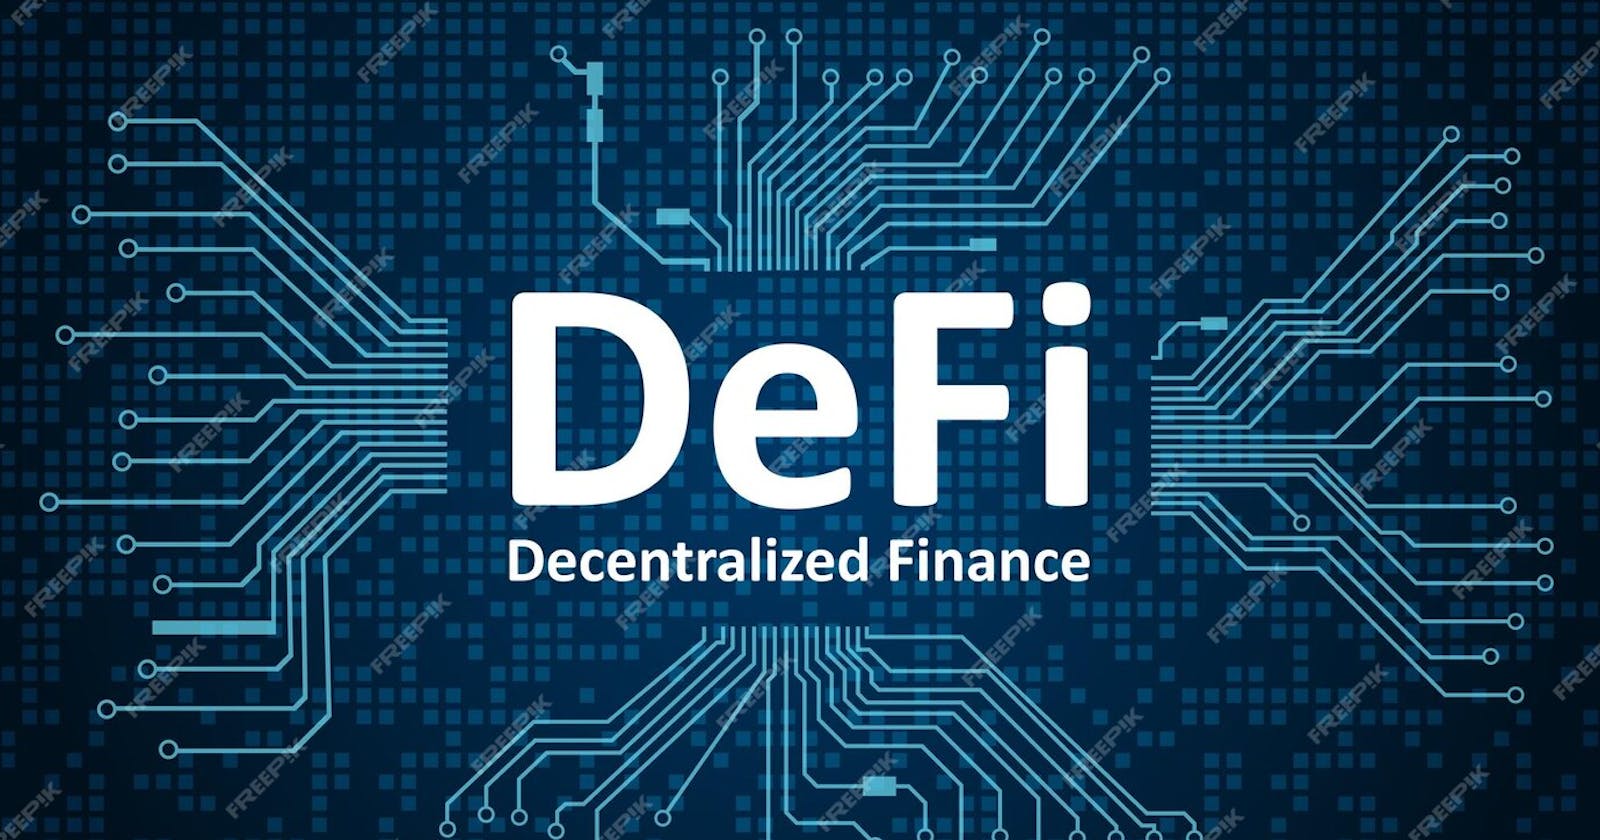 Decentralized Finance: A Journey into Arbitrage and Flash Loans